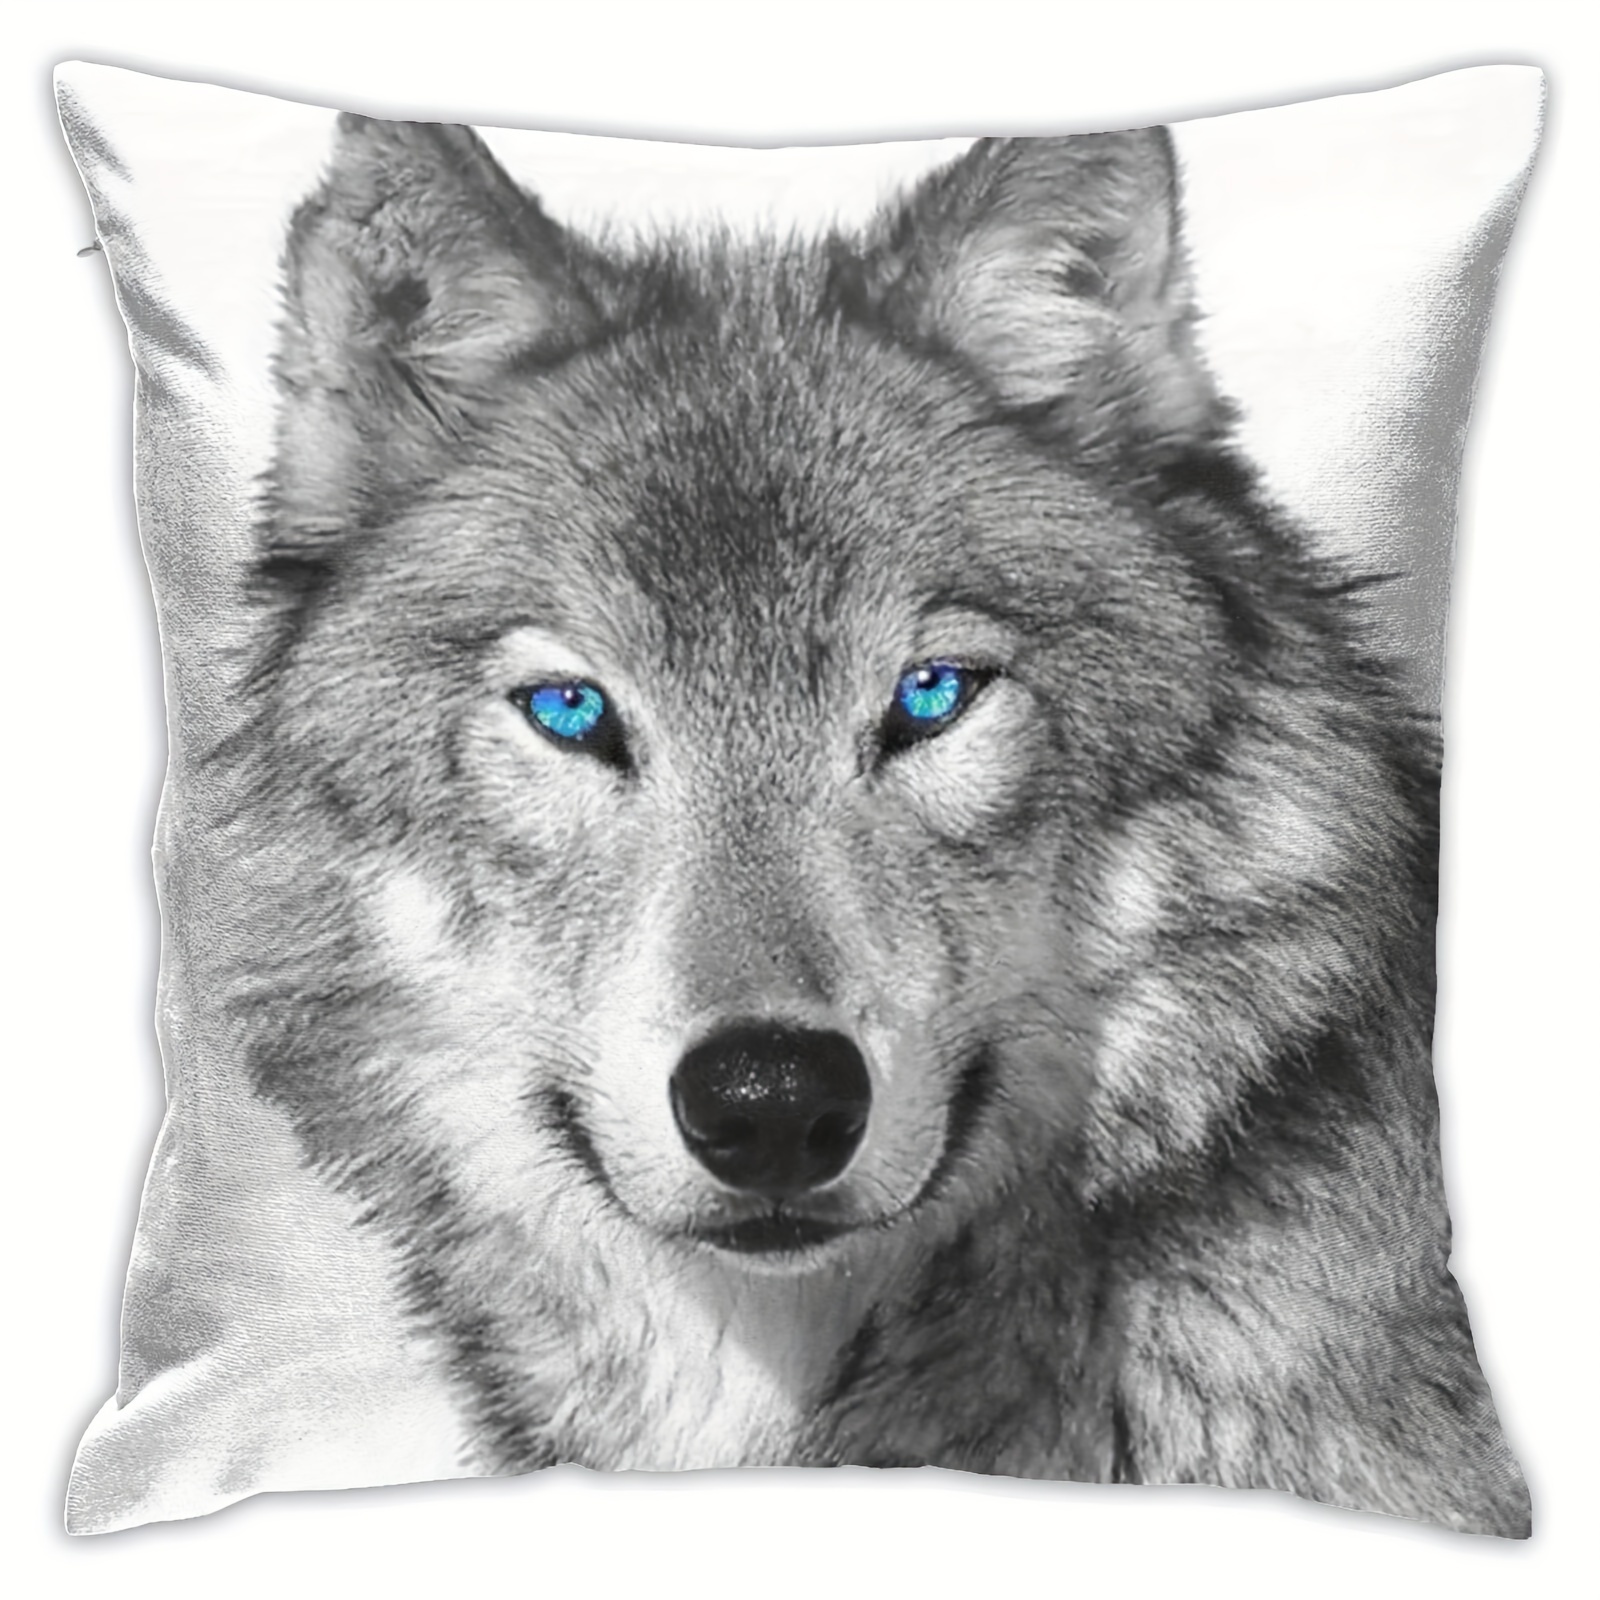 

1pc Blue-eyed Wolf Printed Twin Sides Decorative Throw Pillow Cushion Covers Throw Pillow Cases For Couch Bedroom Car 18 X 18 Inch